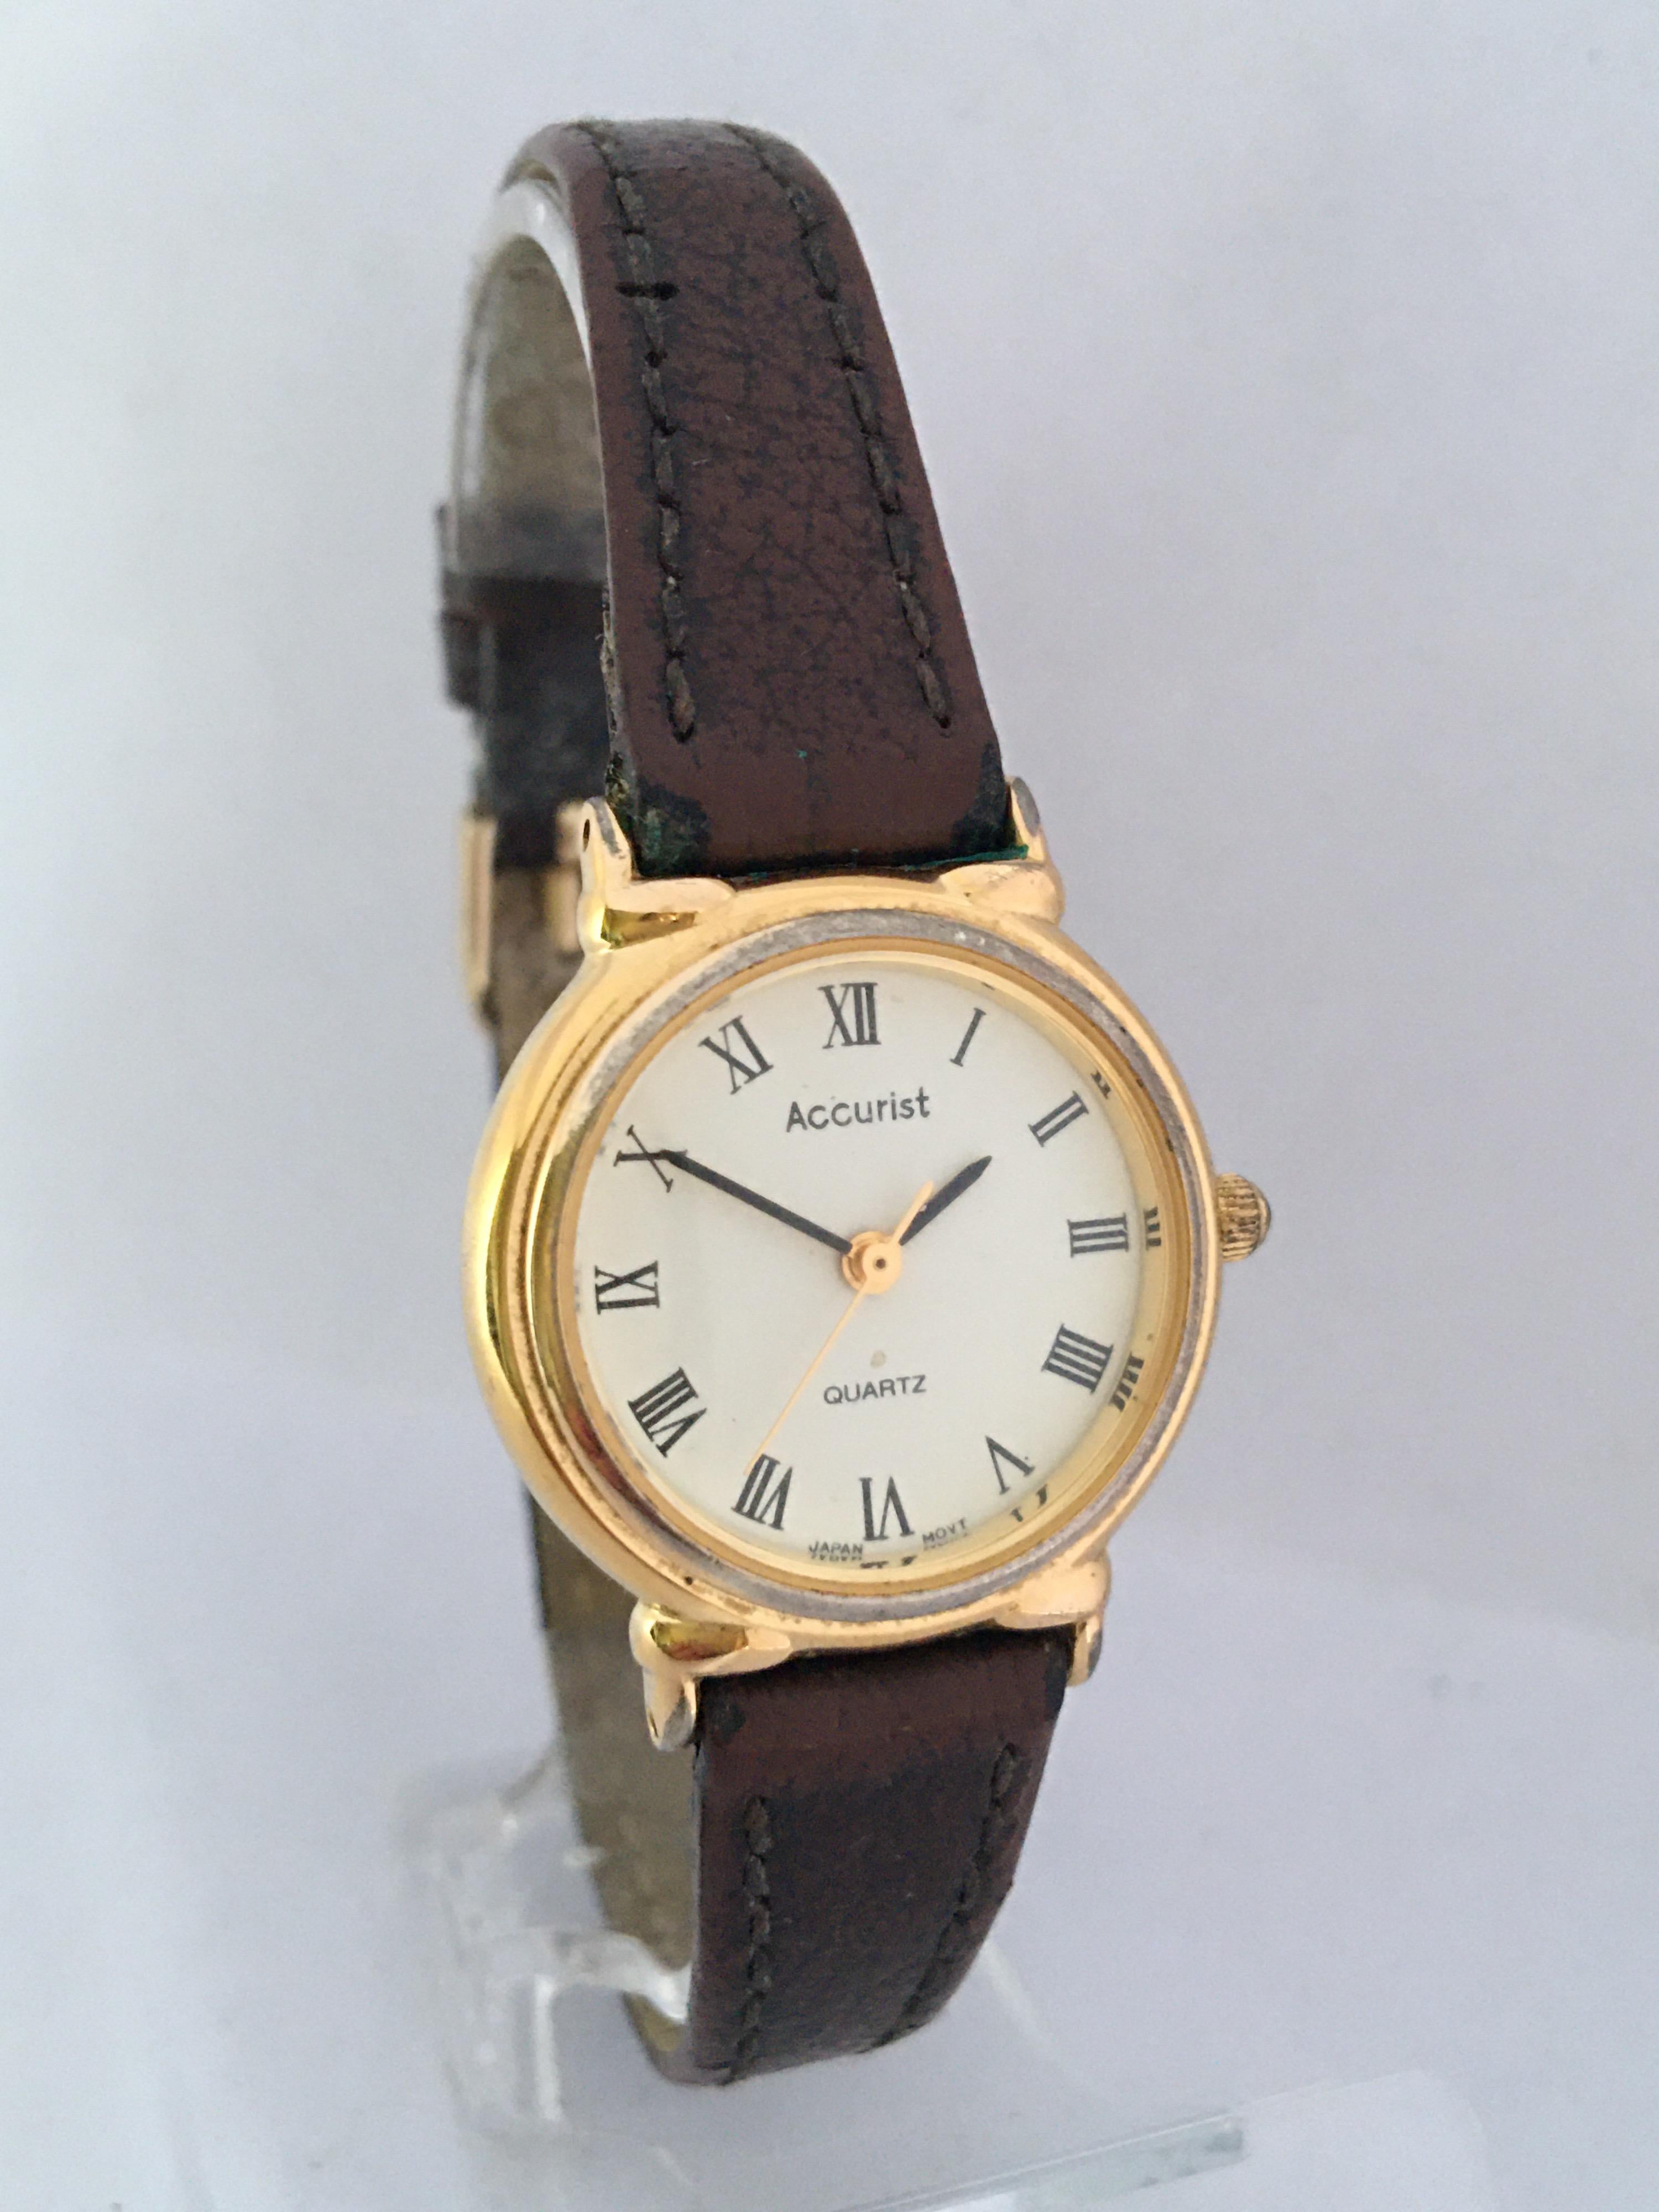 Vintage Gold-Plated and Stainless Steel Back Accurist Quartz Ladies Watch For Sale 3